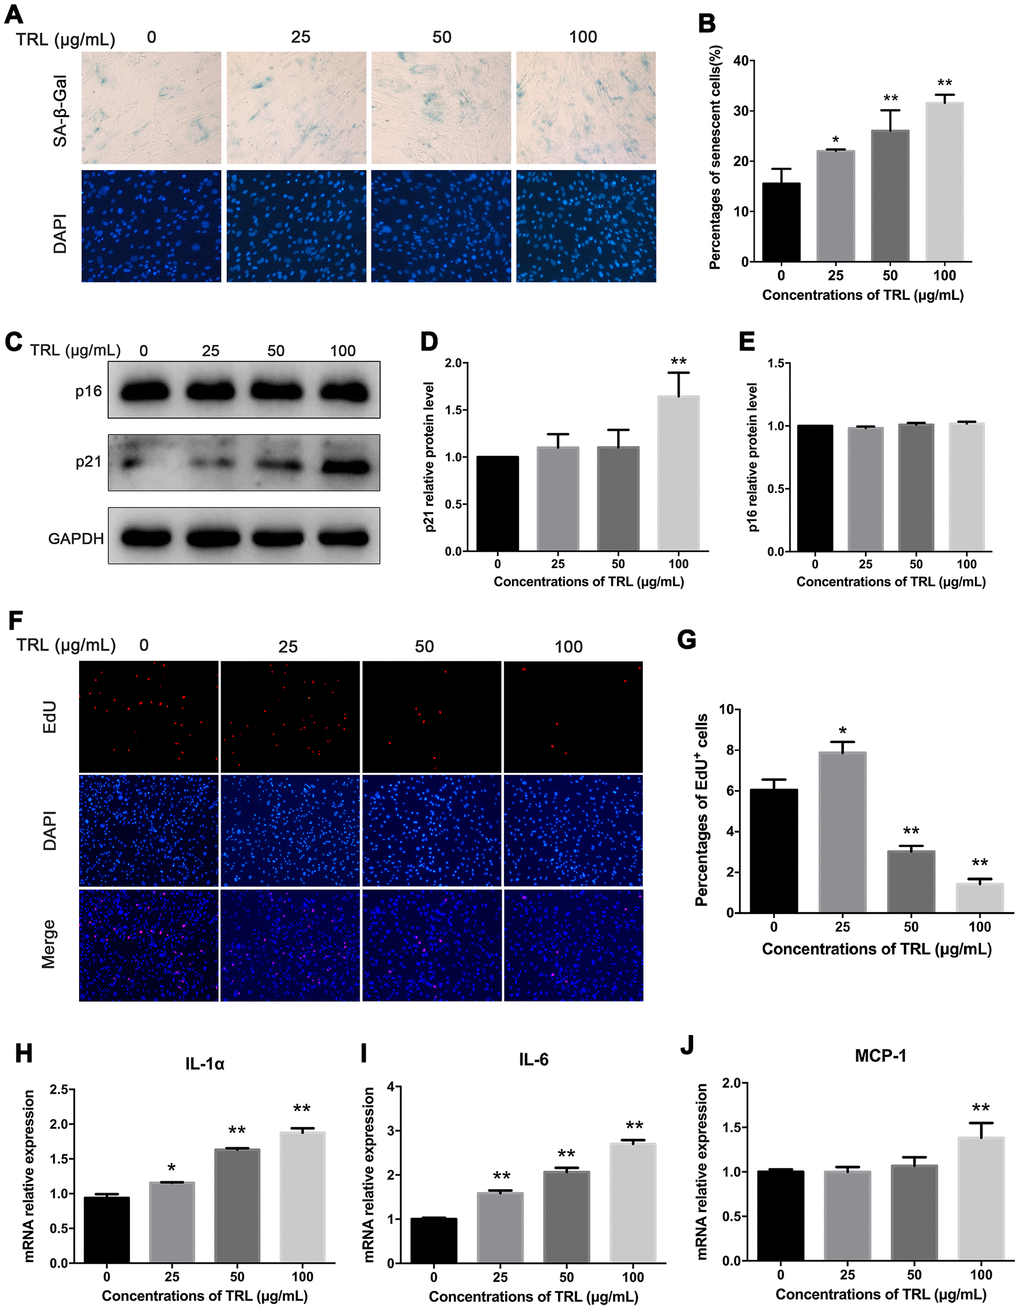 Postprandial TRL induced premature senescence and SASP in AMSCs. (A, B) AMSCs reached approximately 30%-40% culture-confluence were incubated with 0, 25, 50, or 100 μg/mL postprandial TRL for 8 d, and then SA-β-Gal (upper row) and DAPI (lower row) double staining was performed to detect the senescent cells and nuclei, respectively (A). Images were obtained under a microscope (×200 magnification). SA-β-Gal positive cells were counted manually by scanning a total of 200 cells in each sample (B). (C–E) Protein levels of senescent markers, p21 and p16, were detected using western blotting (C), and then the relative protein levels of p21 (D) and p16 (E) were analyzed using ImageJ. (F, G) The proliferation capacity of AMSCs incubated with different concentrations of postprandial TRL was measured using an EdU incorporation assay (F) and the EdU positive cells were counted using ImageJ (G). Images were obtained under a microscope (×100 magnification). (H–J) Expression levels of genes encoding senescence-related inflammatory cytokines, including IL-1α (H), IL-6 (I), and MCP-1 (J), were detected using qRT-PCR in AMSCs incubated with postprandial TRL at 0, 25, 50, or 100 μg/mL for 8 d. Data are expressed as mean ± SD (n ≥ 3). *P **P 